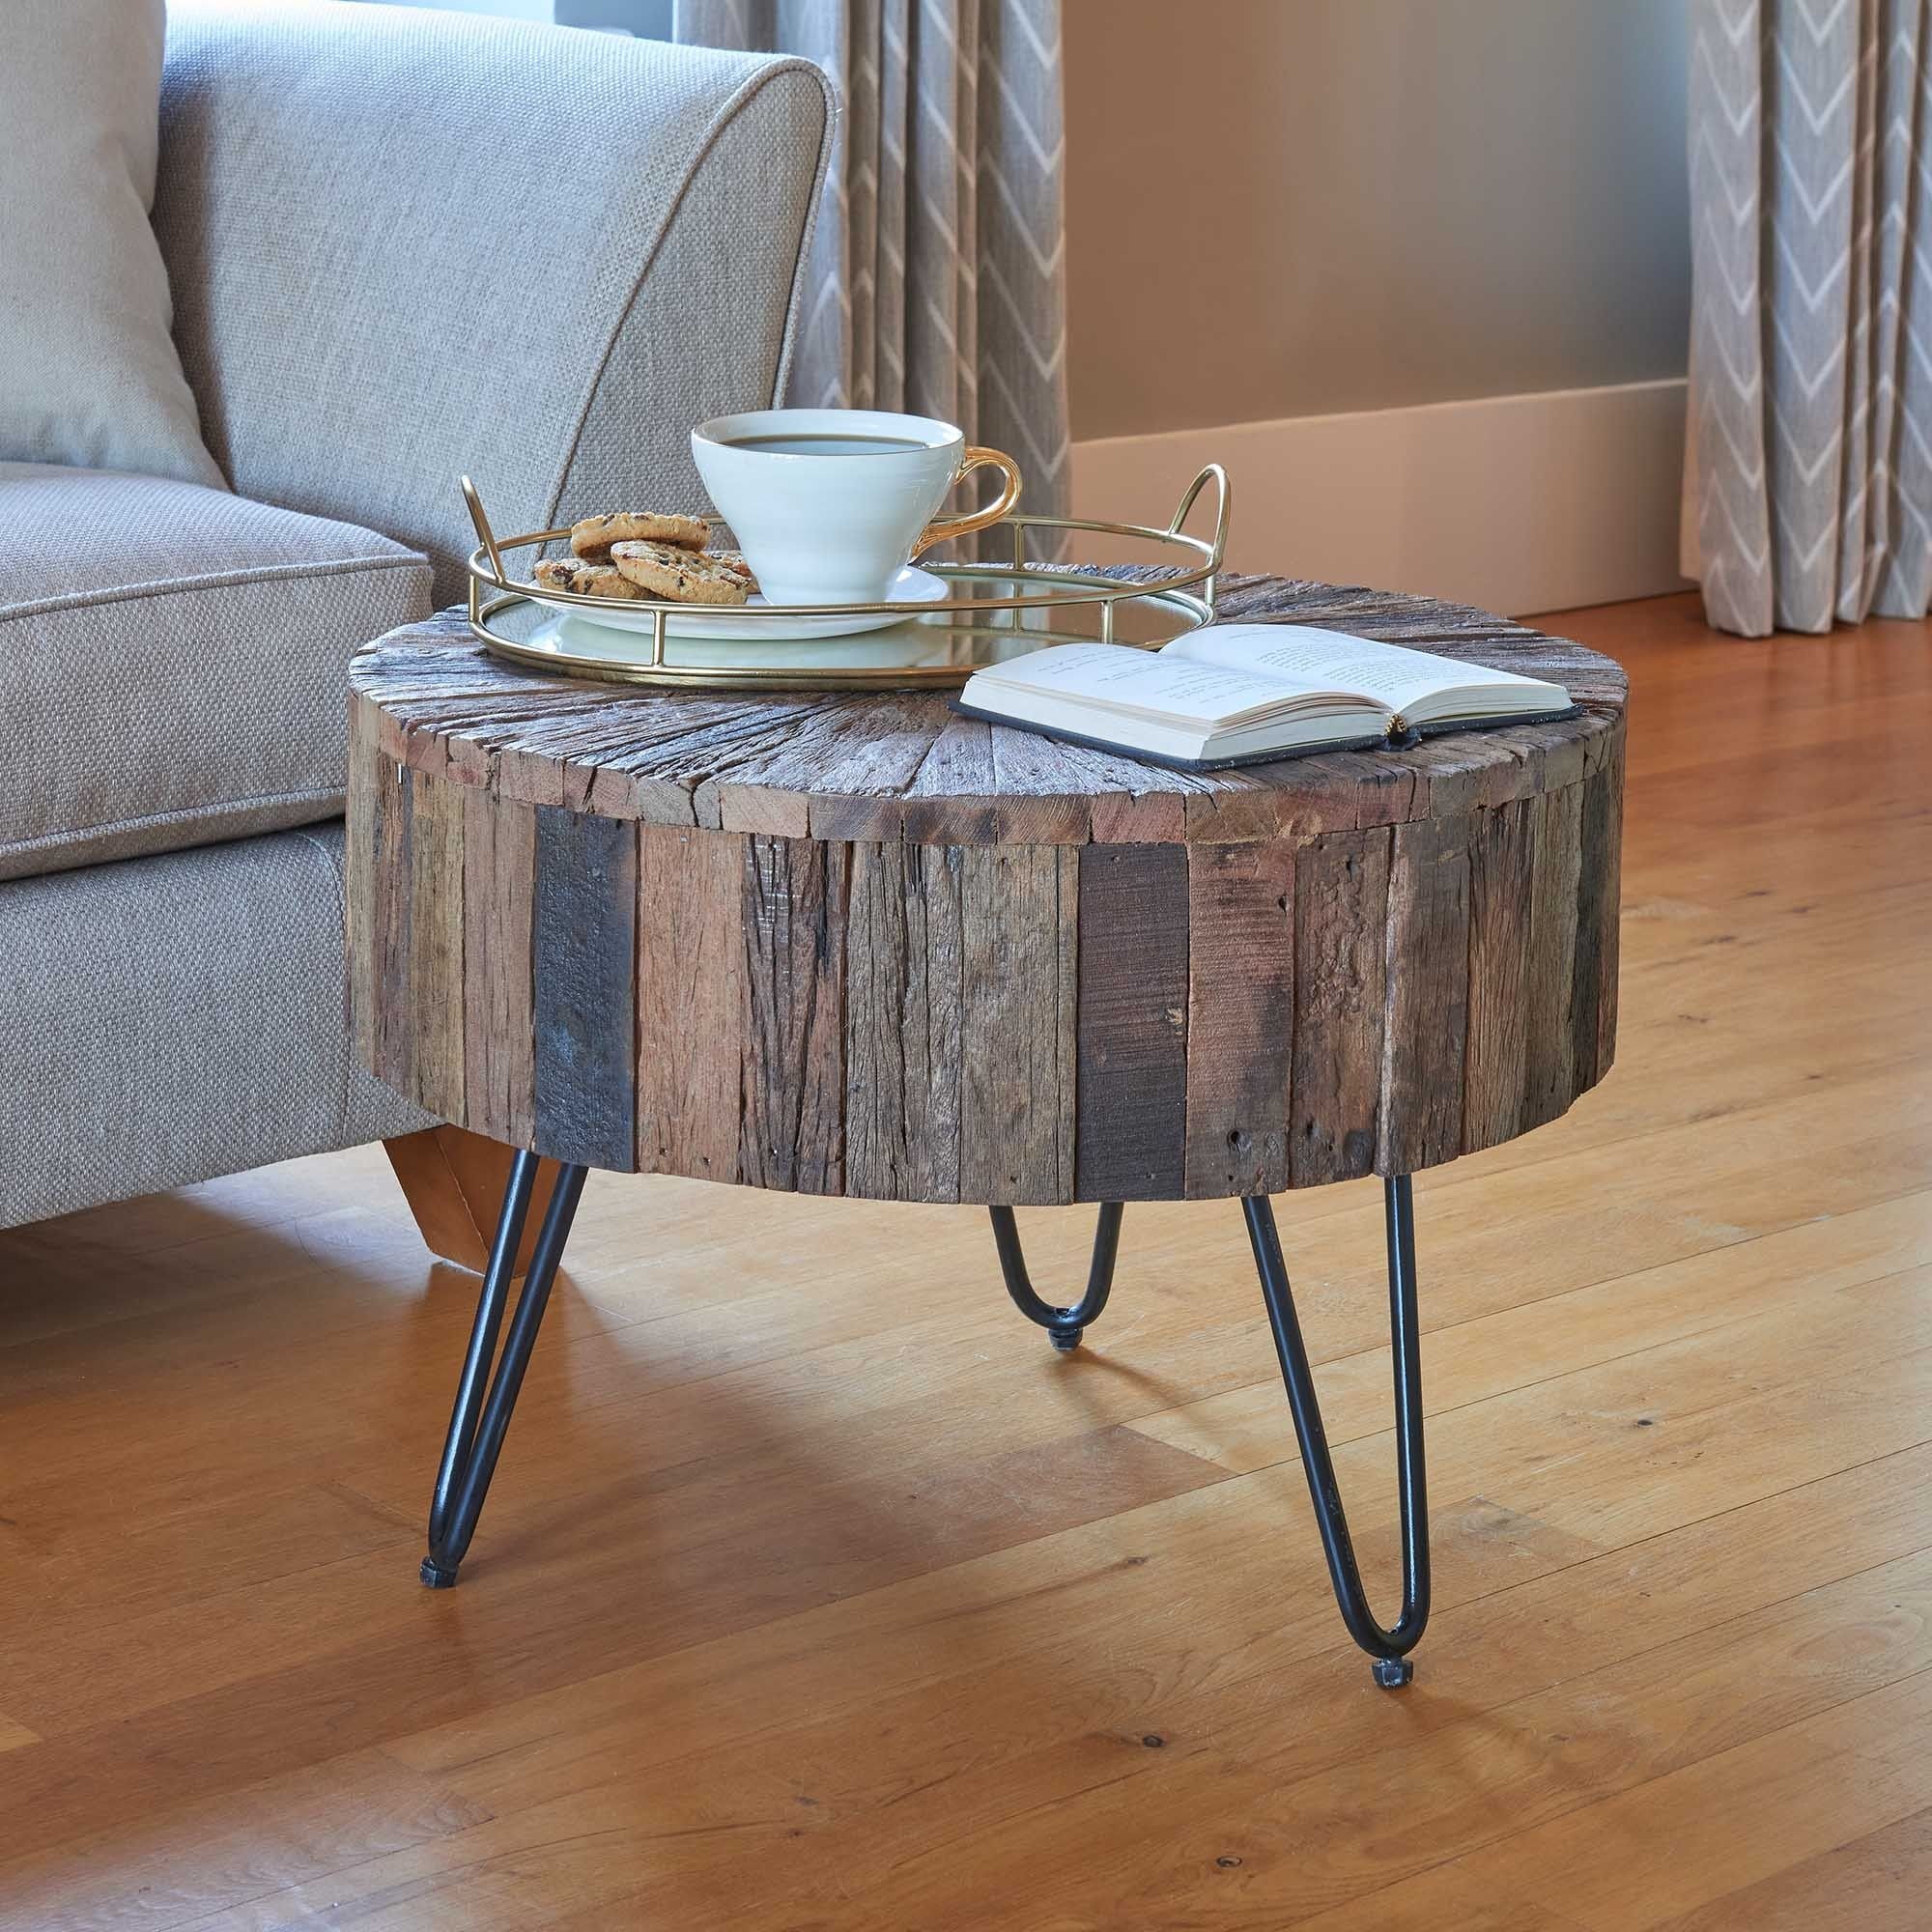 Round Mango Wood Coffee Table | Lounge | Wood Coffee Tables In Coffee Tables With Round Wooden Tops (View 12 of 20)